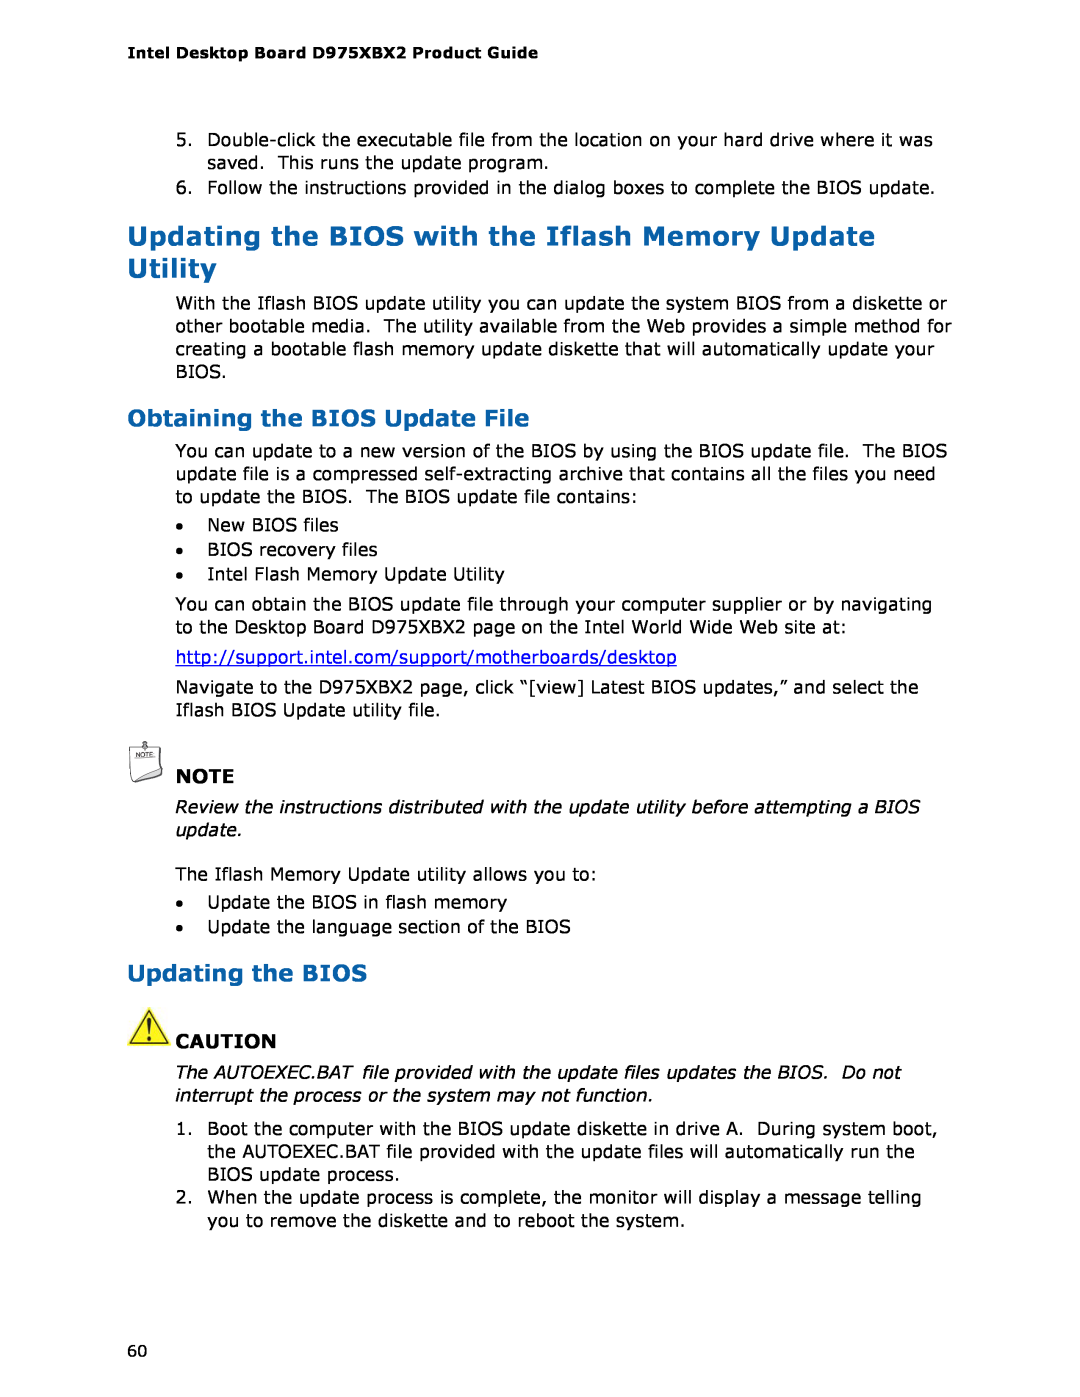 Intel D975XBX2 manual Obtaining the BIOS Update File, Updating the BIOS 